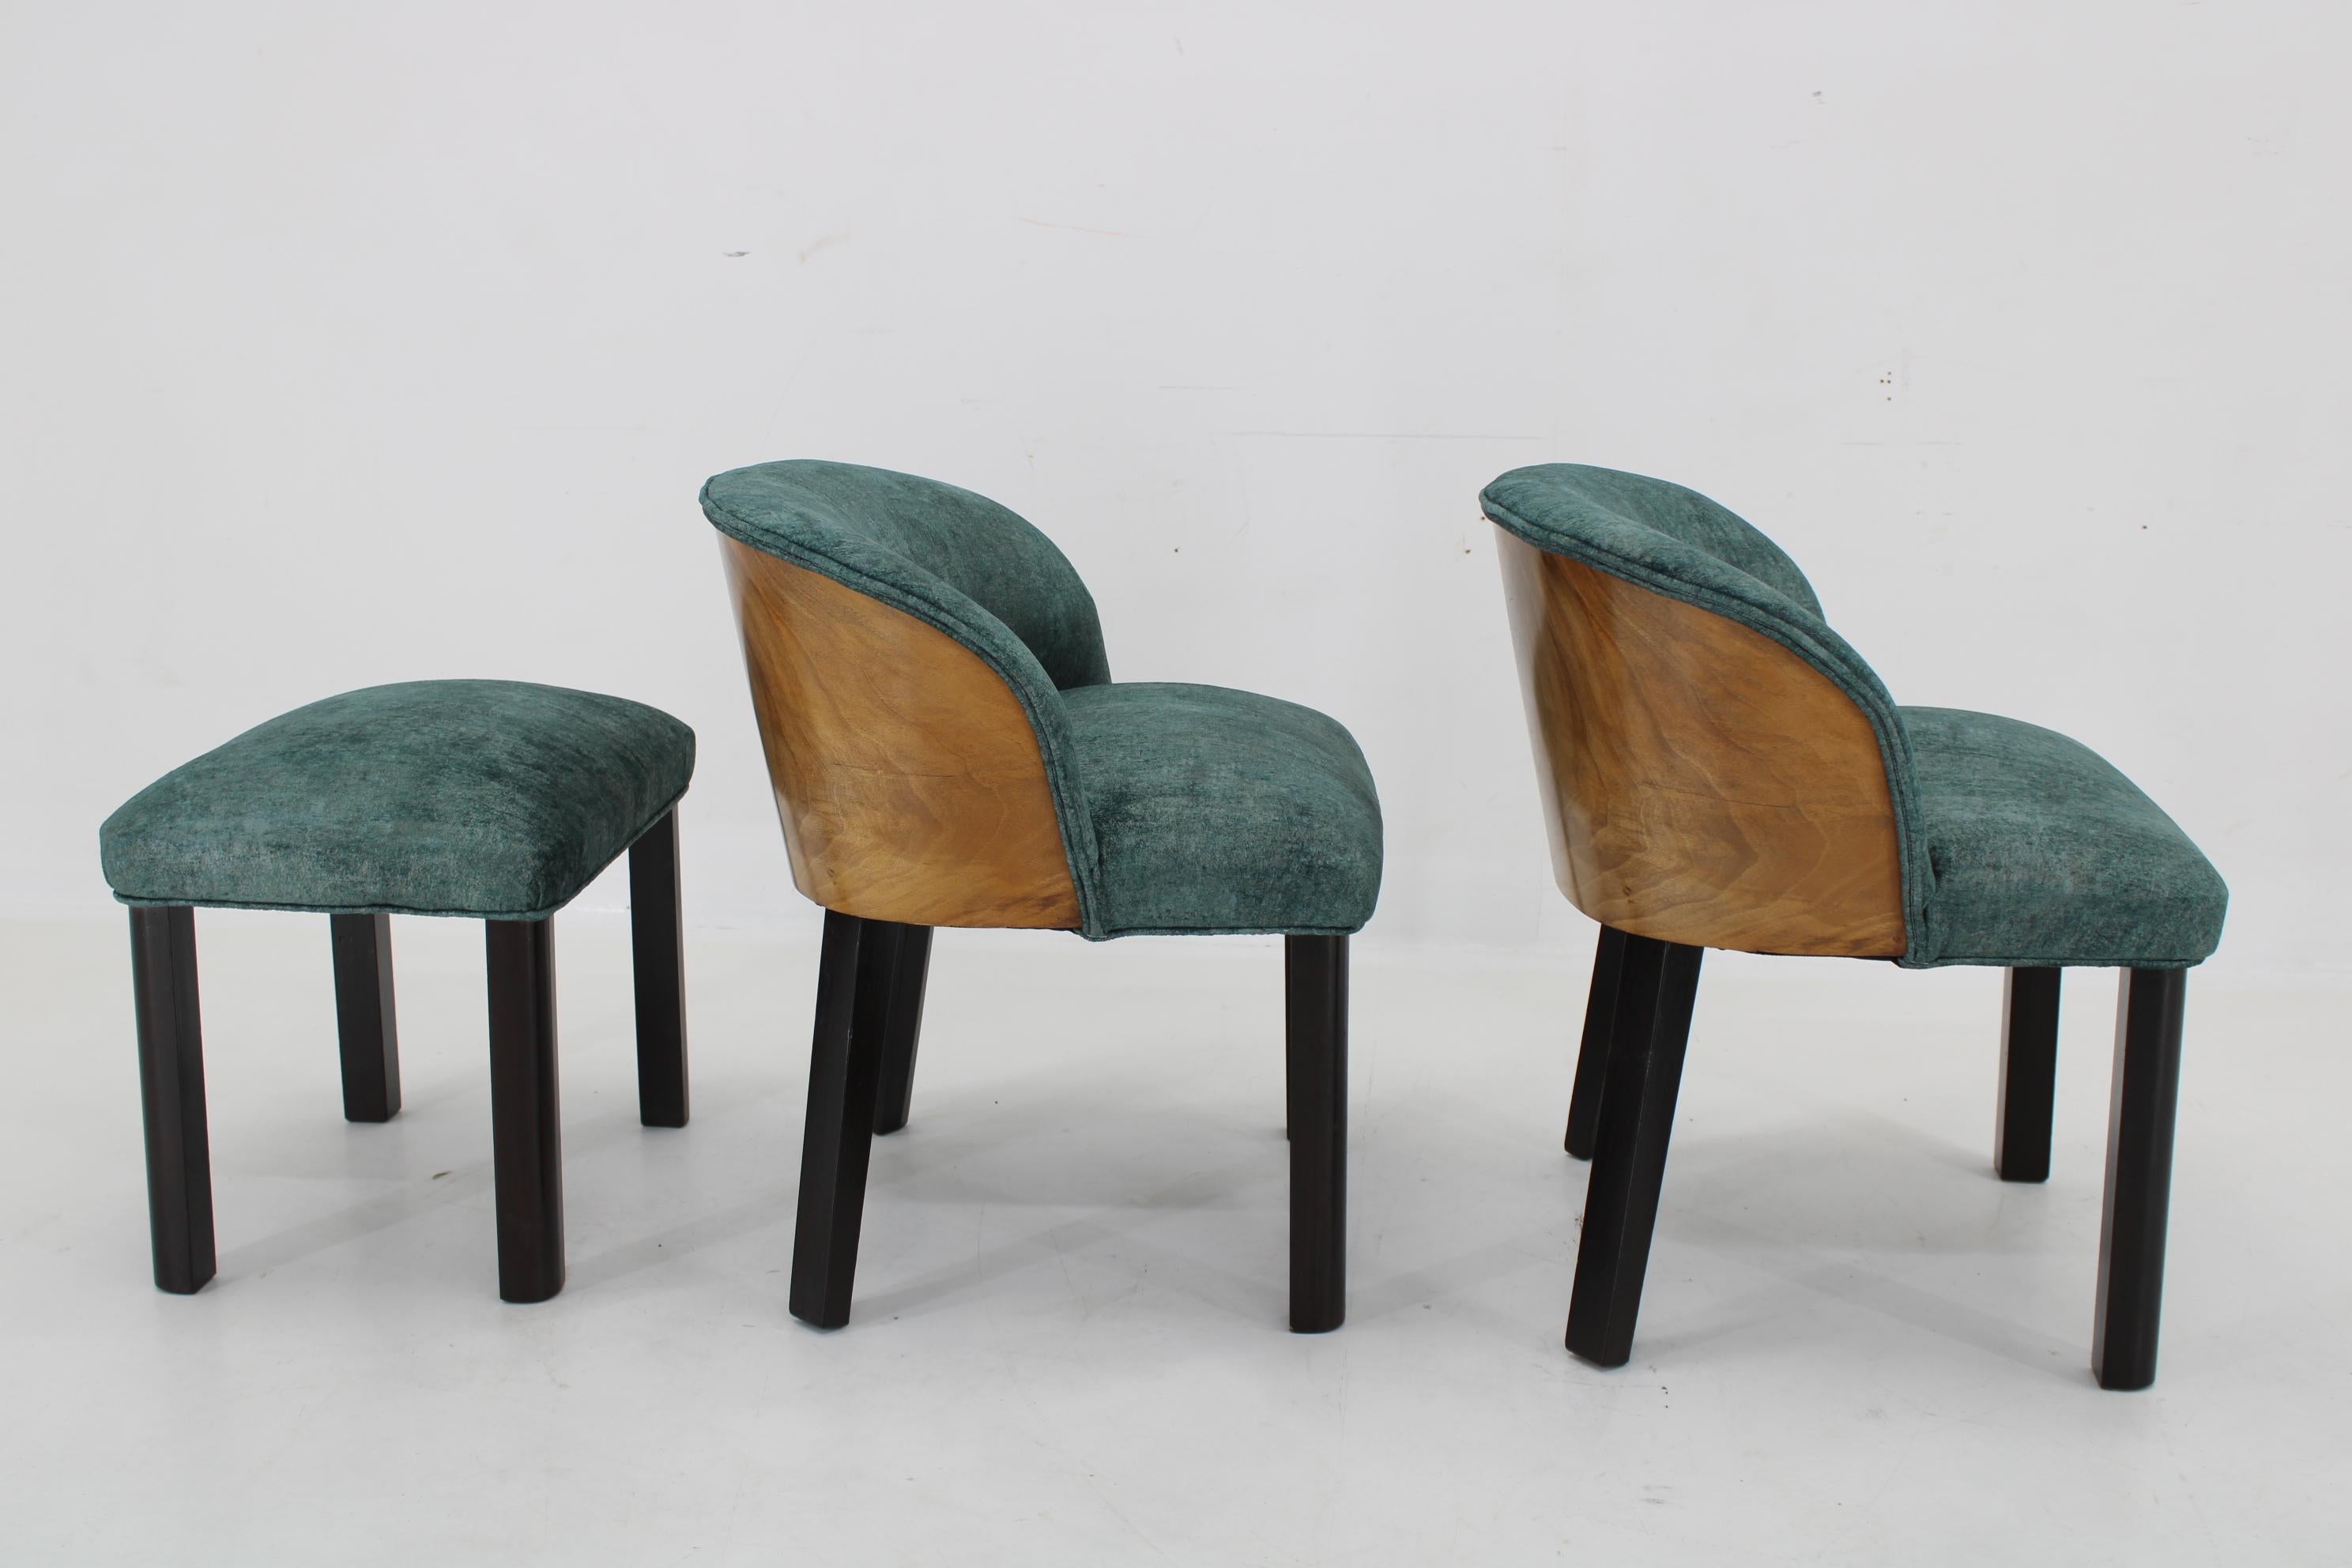 1940s Pair of Chairs with Stool, Italy For Sale 1